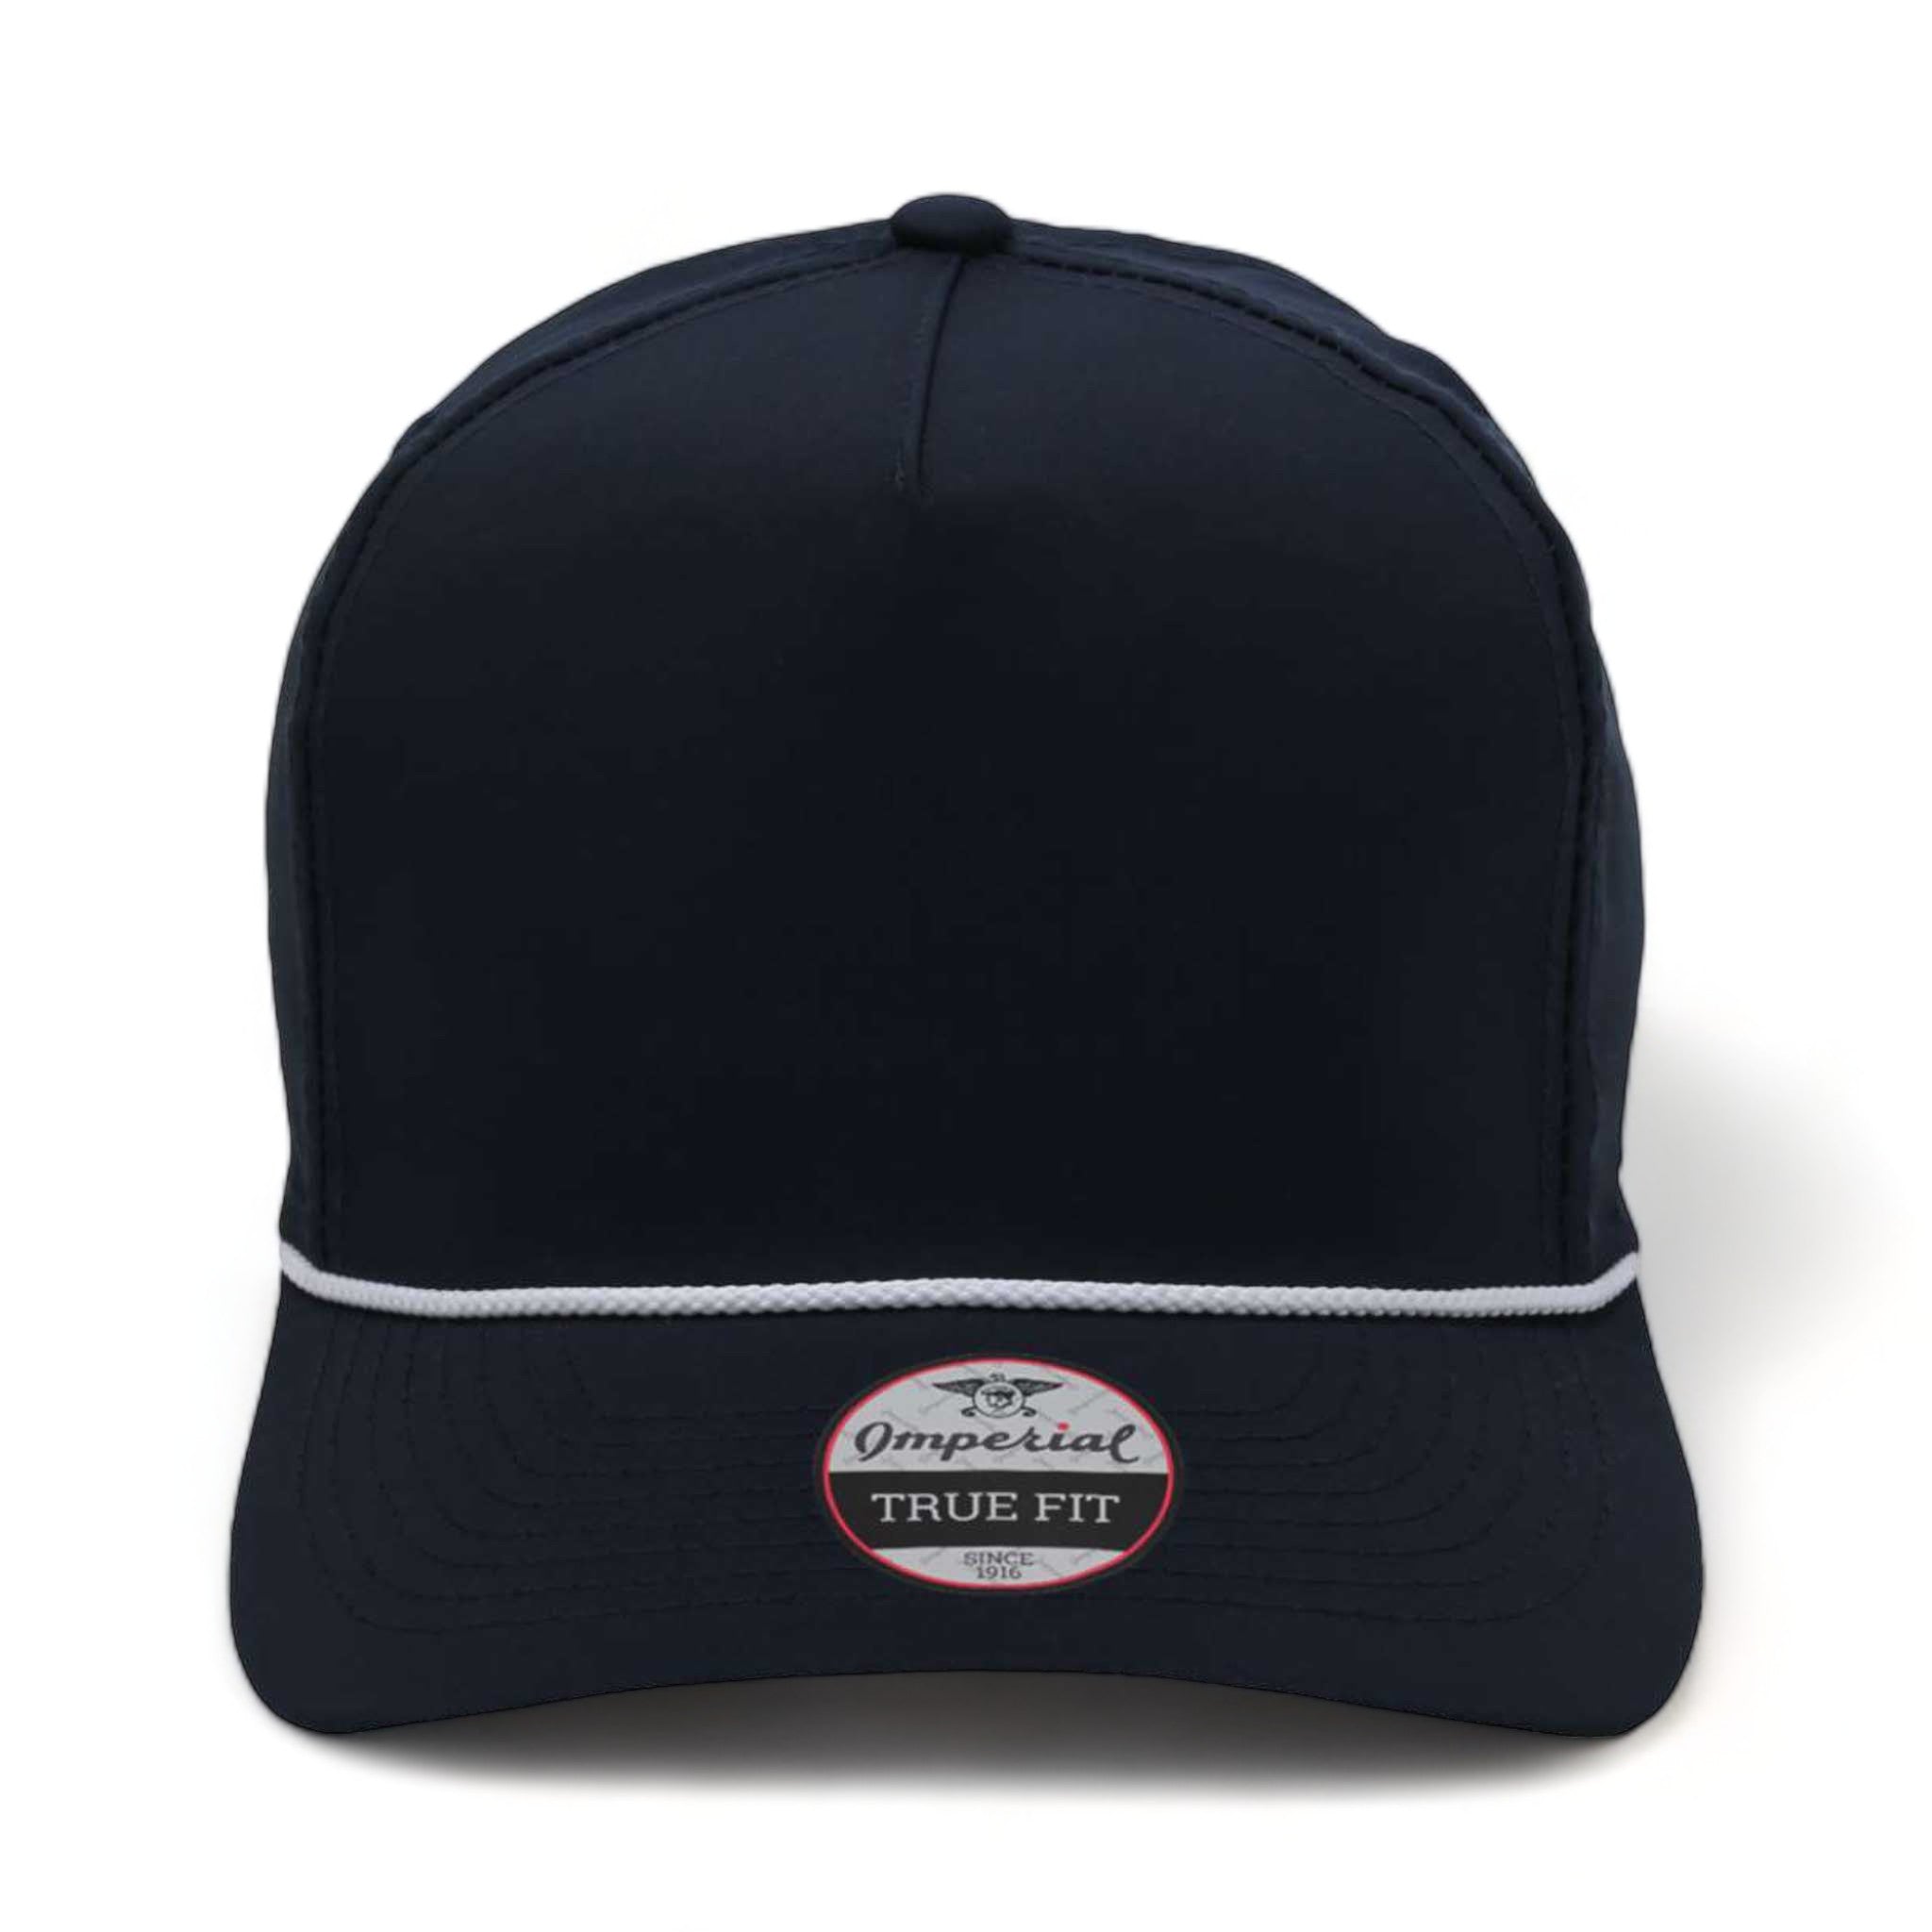 Front view of Imperial 5054 custom hat in navy and white